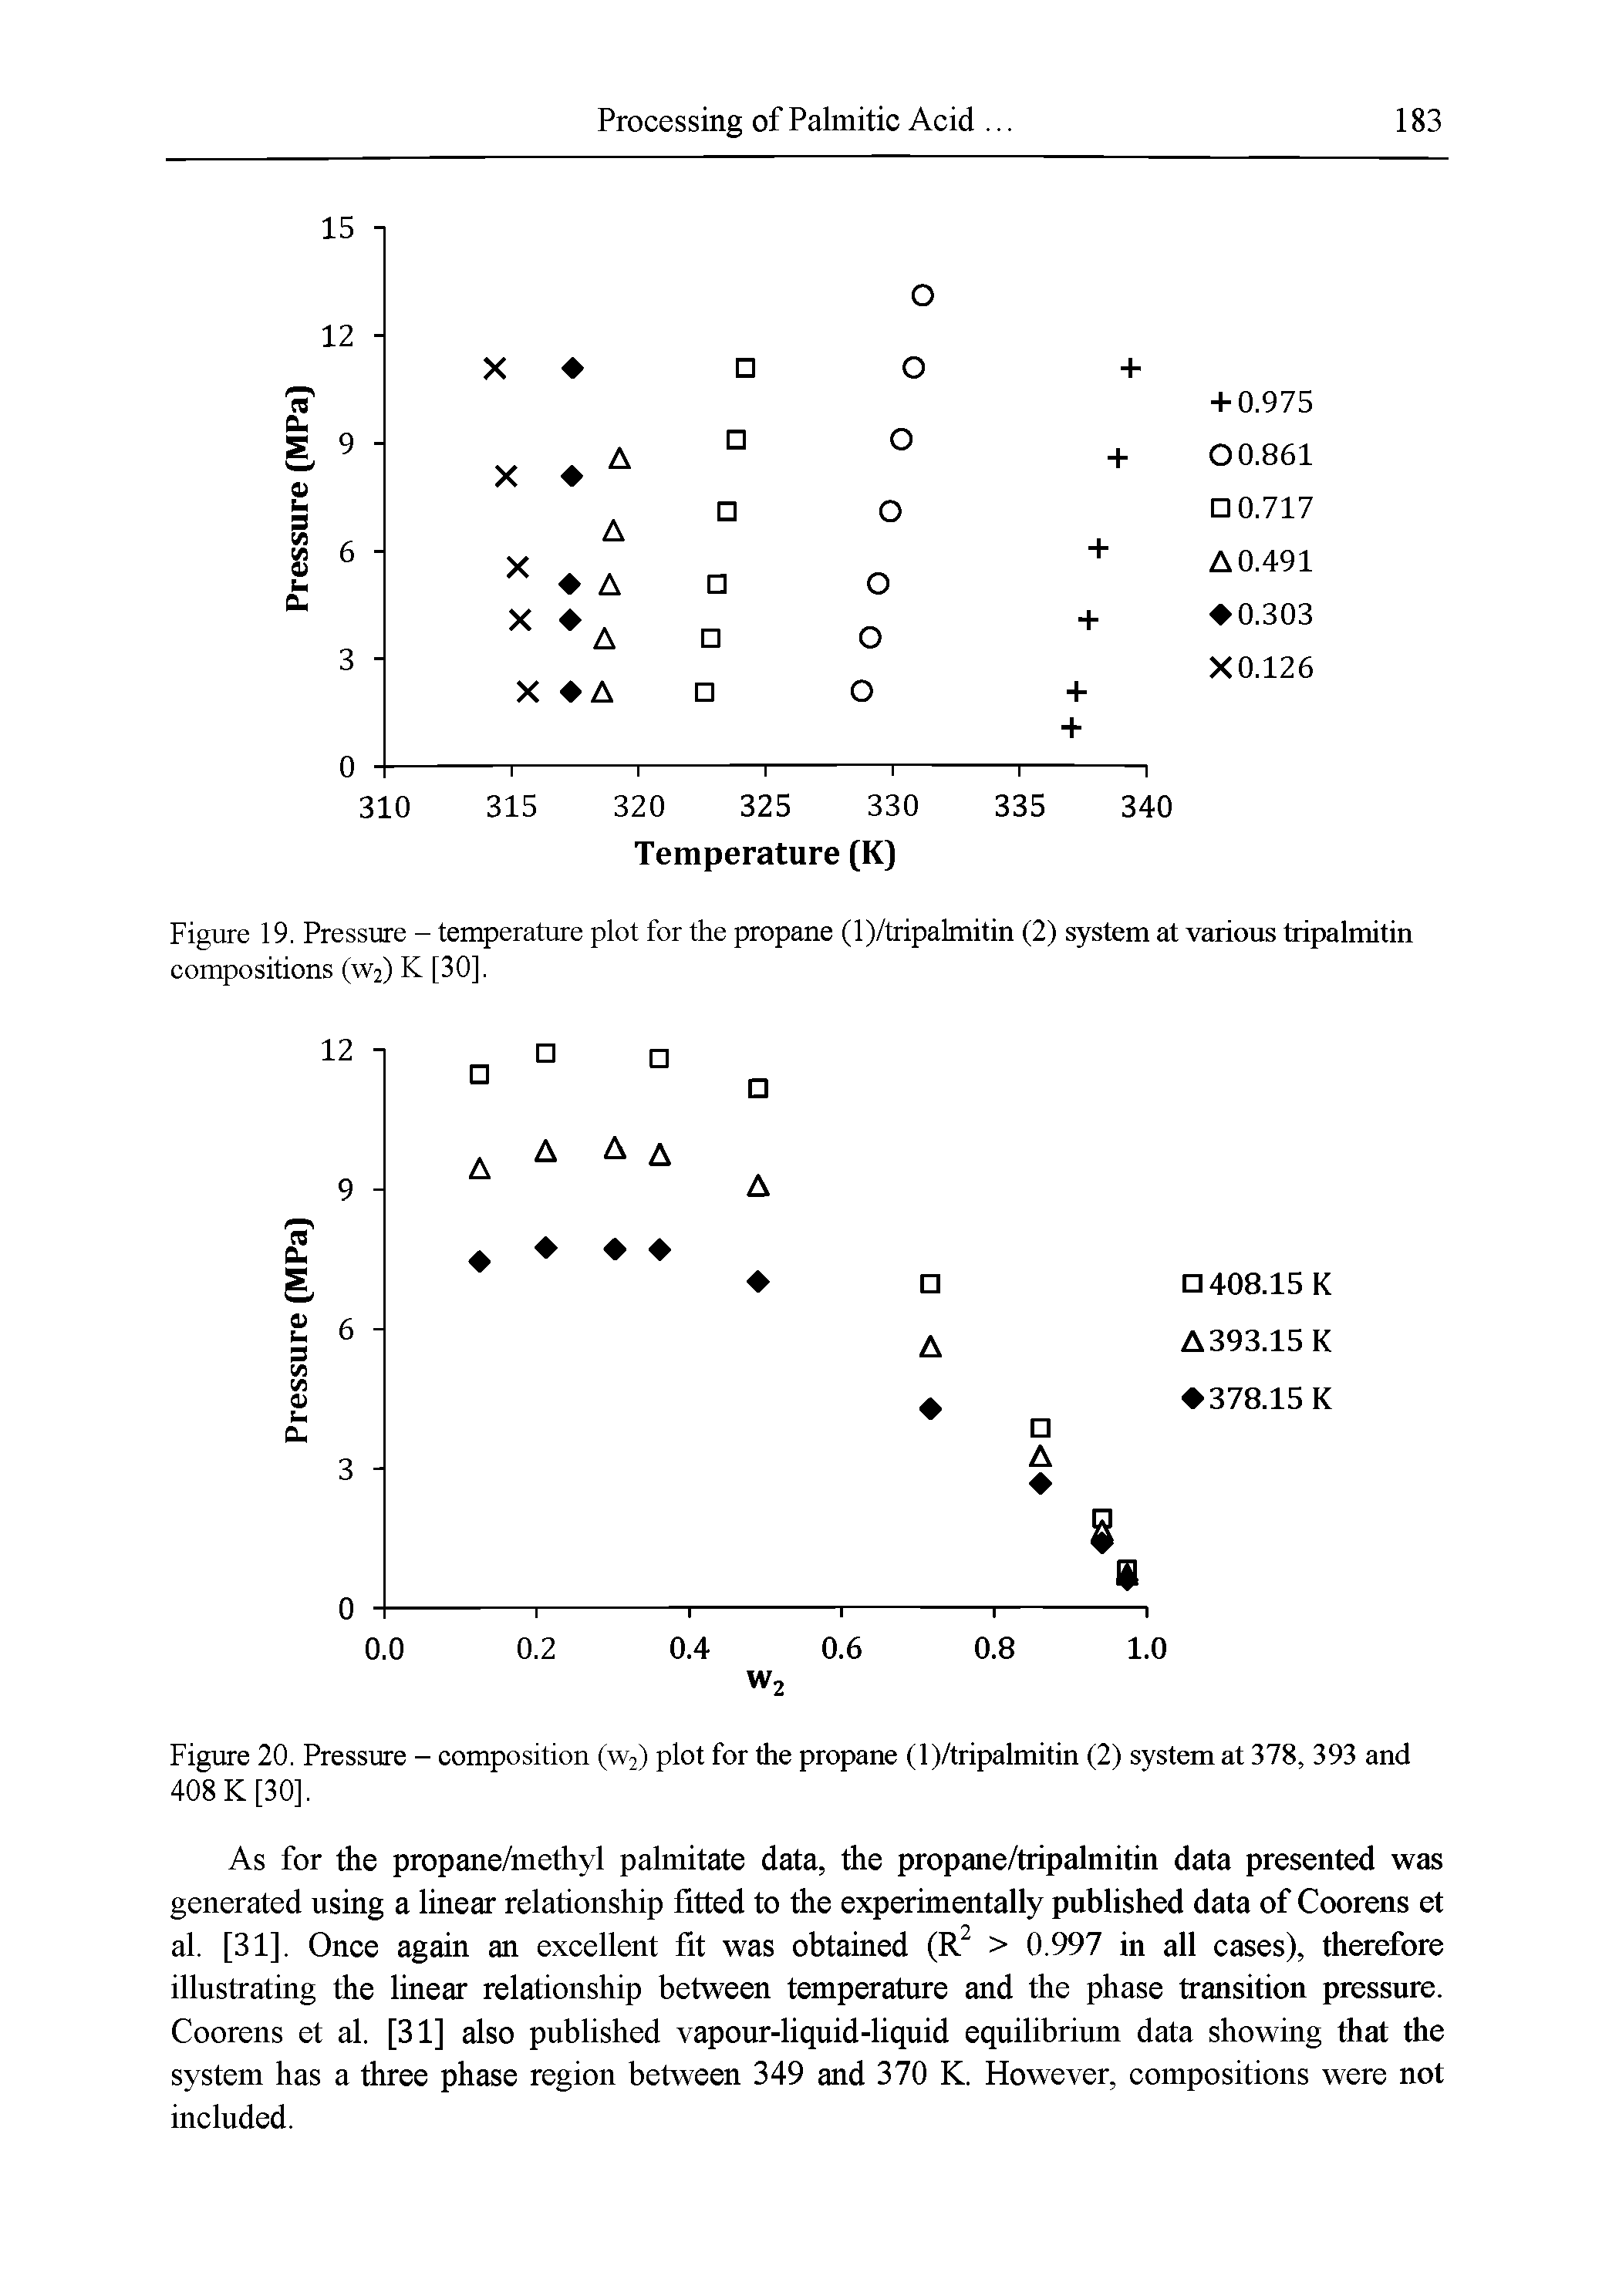 Figure 19. Pressure - temperature plot for the propane (l)/tripalmitin (2) system at various tripalmitin compositions (W2) K [30],...